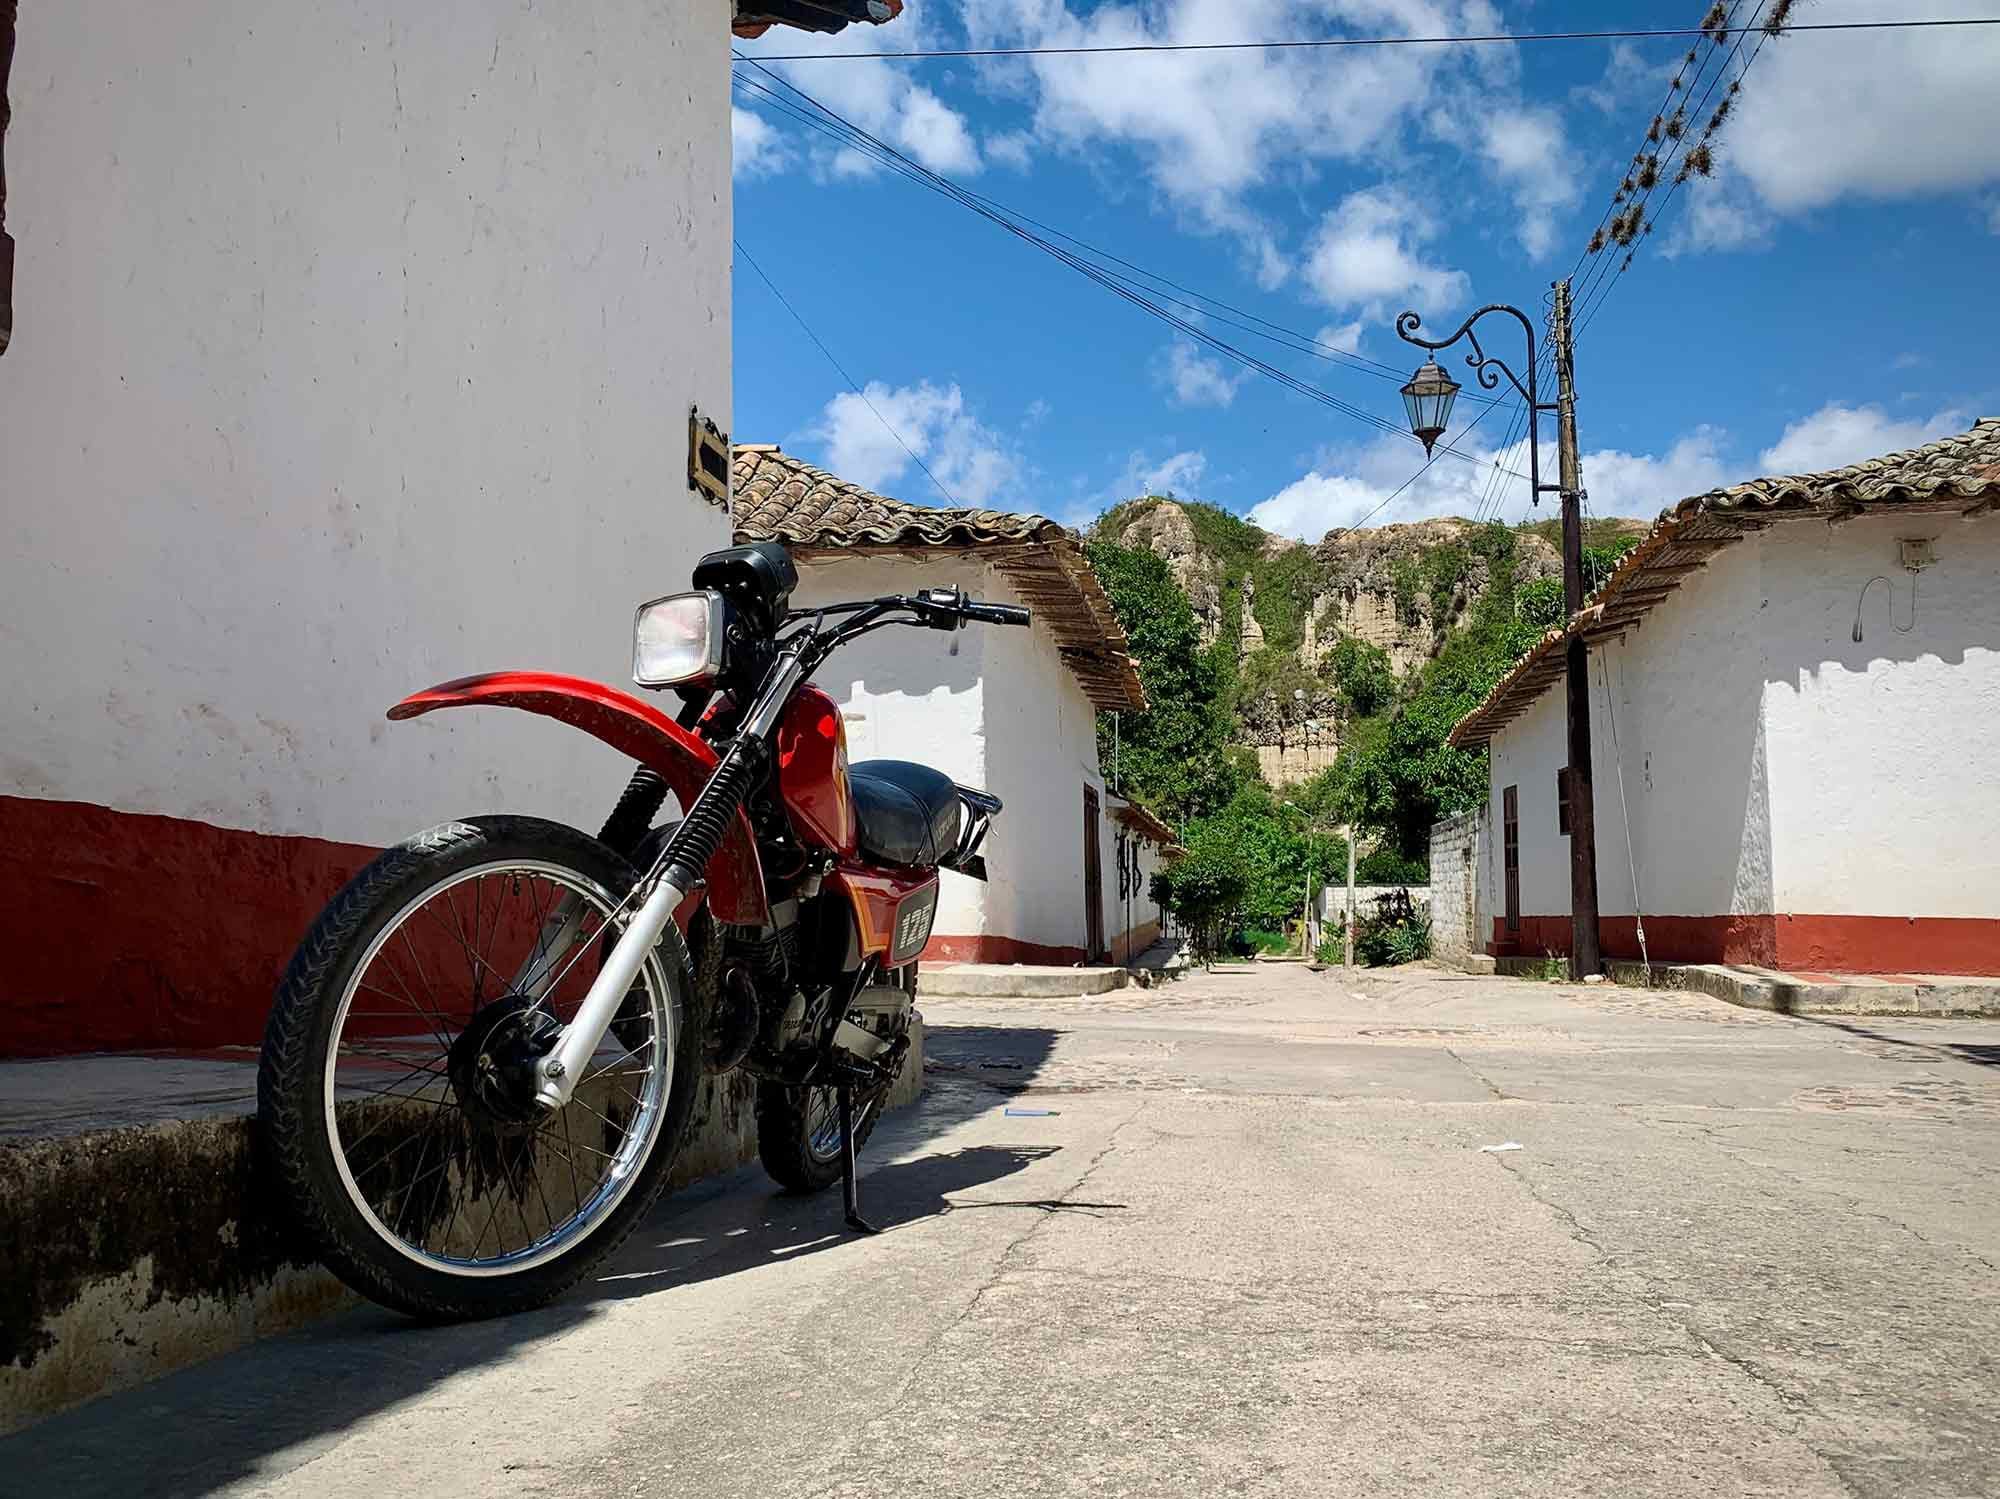 More of my local motorcycle photo tour through Playa de Belen. Walking these quaint streets, you can perceive the feelings of respect and affection the locals have with their town and their land by the care they show for their houses and streets.